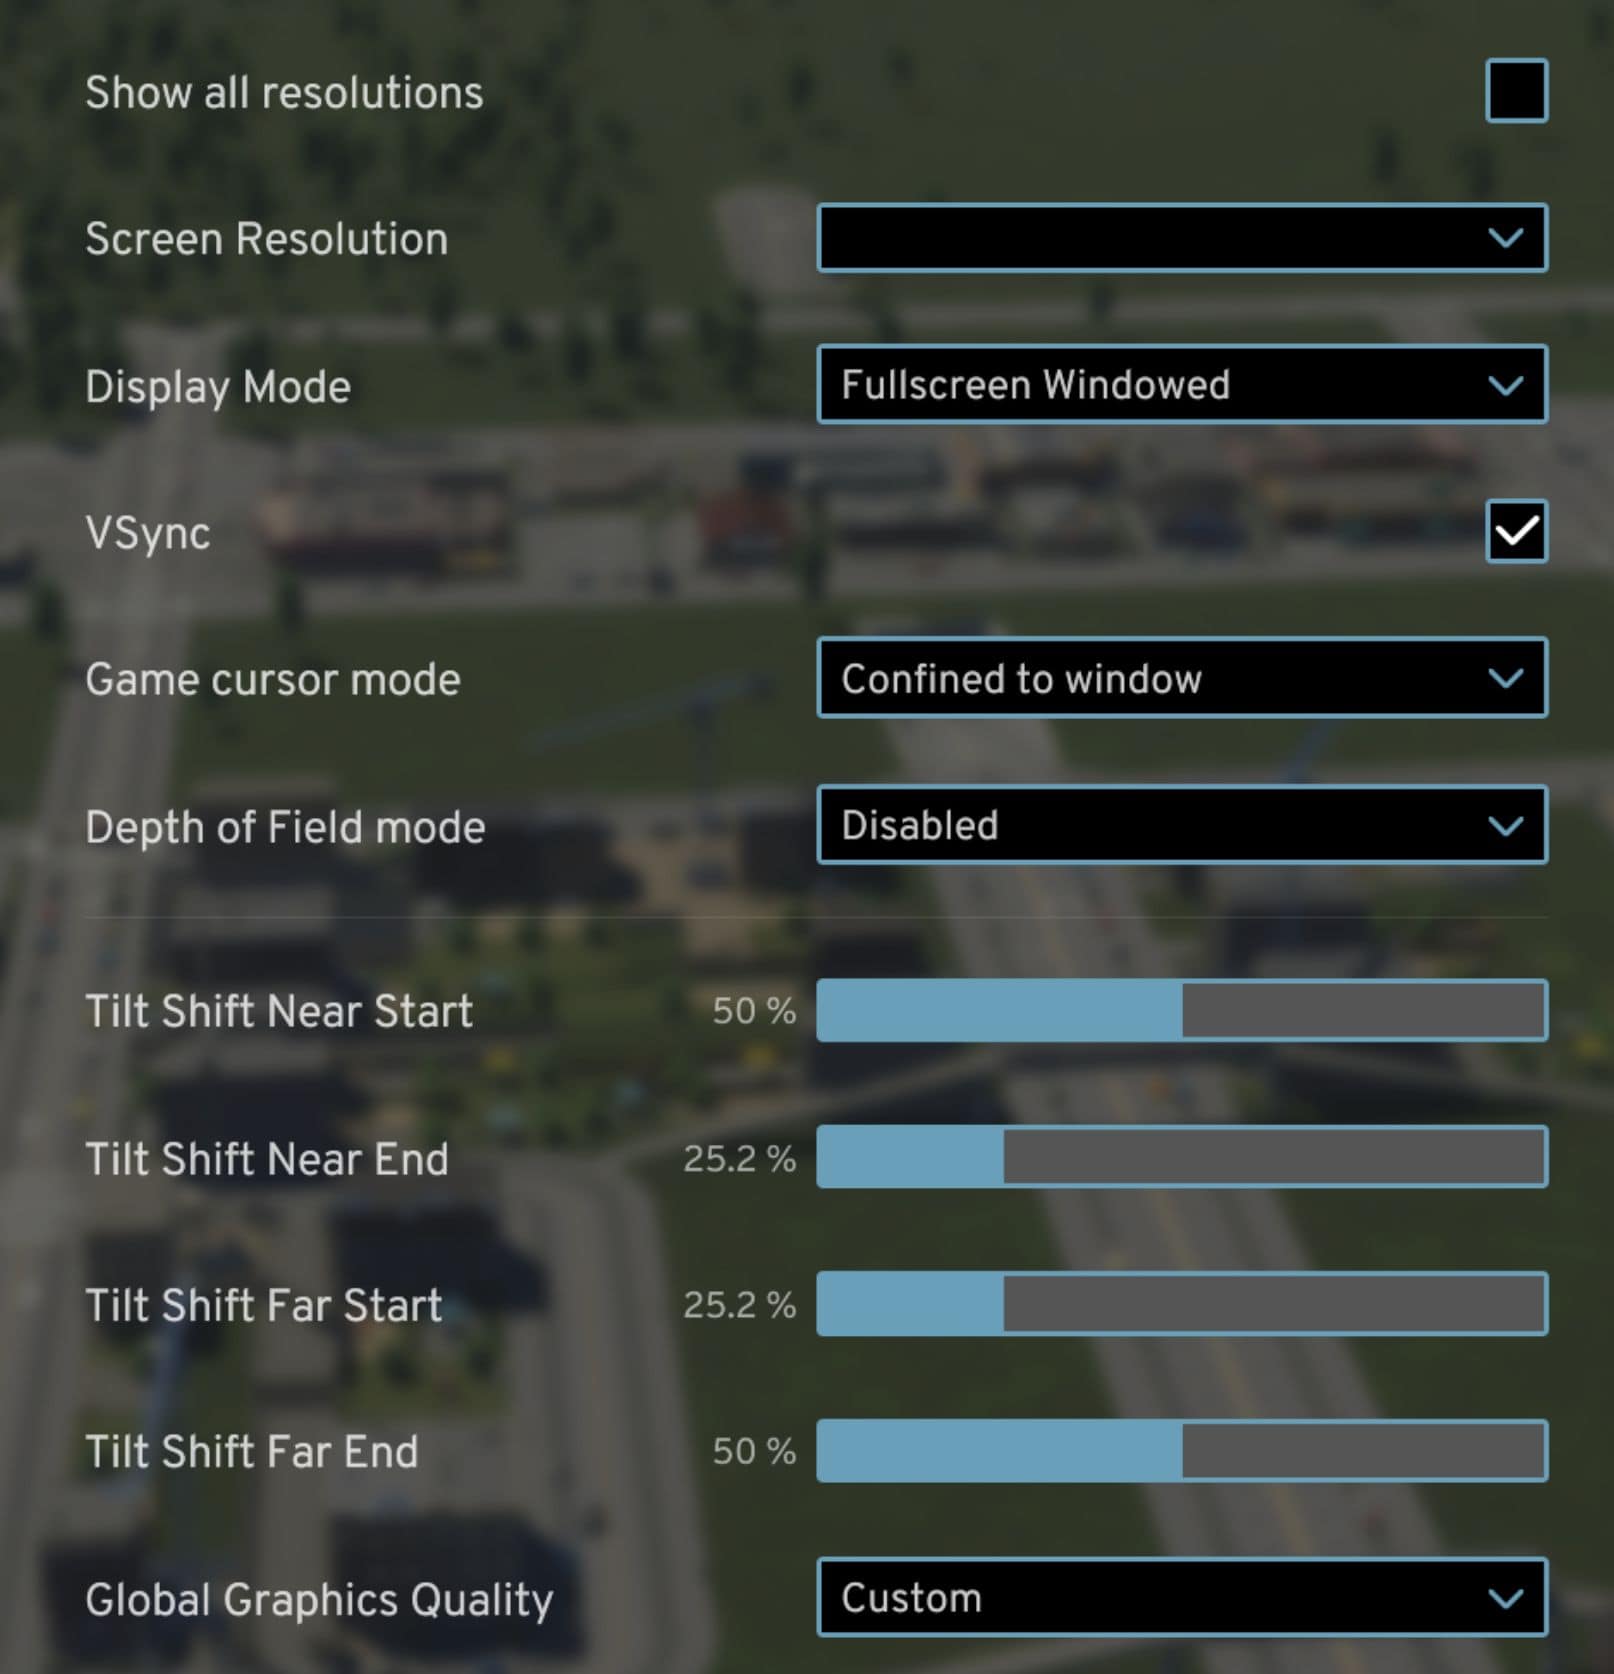 Cities: Skylines 2 PC performance and best settings